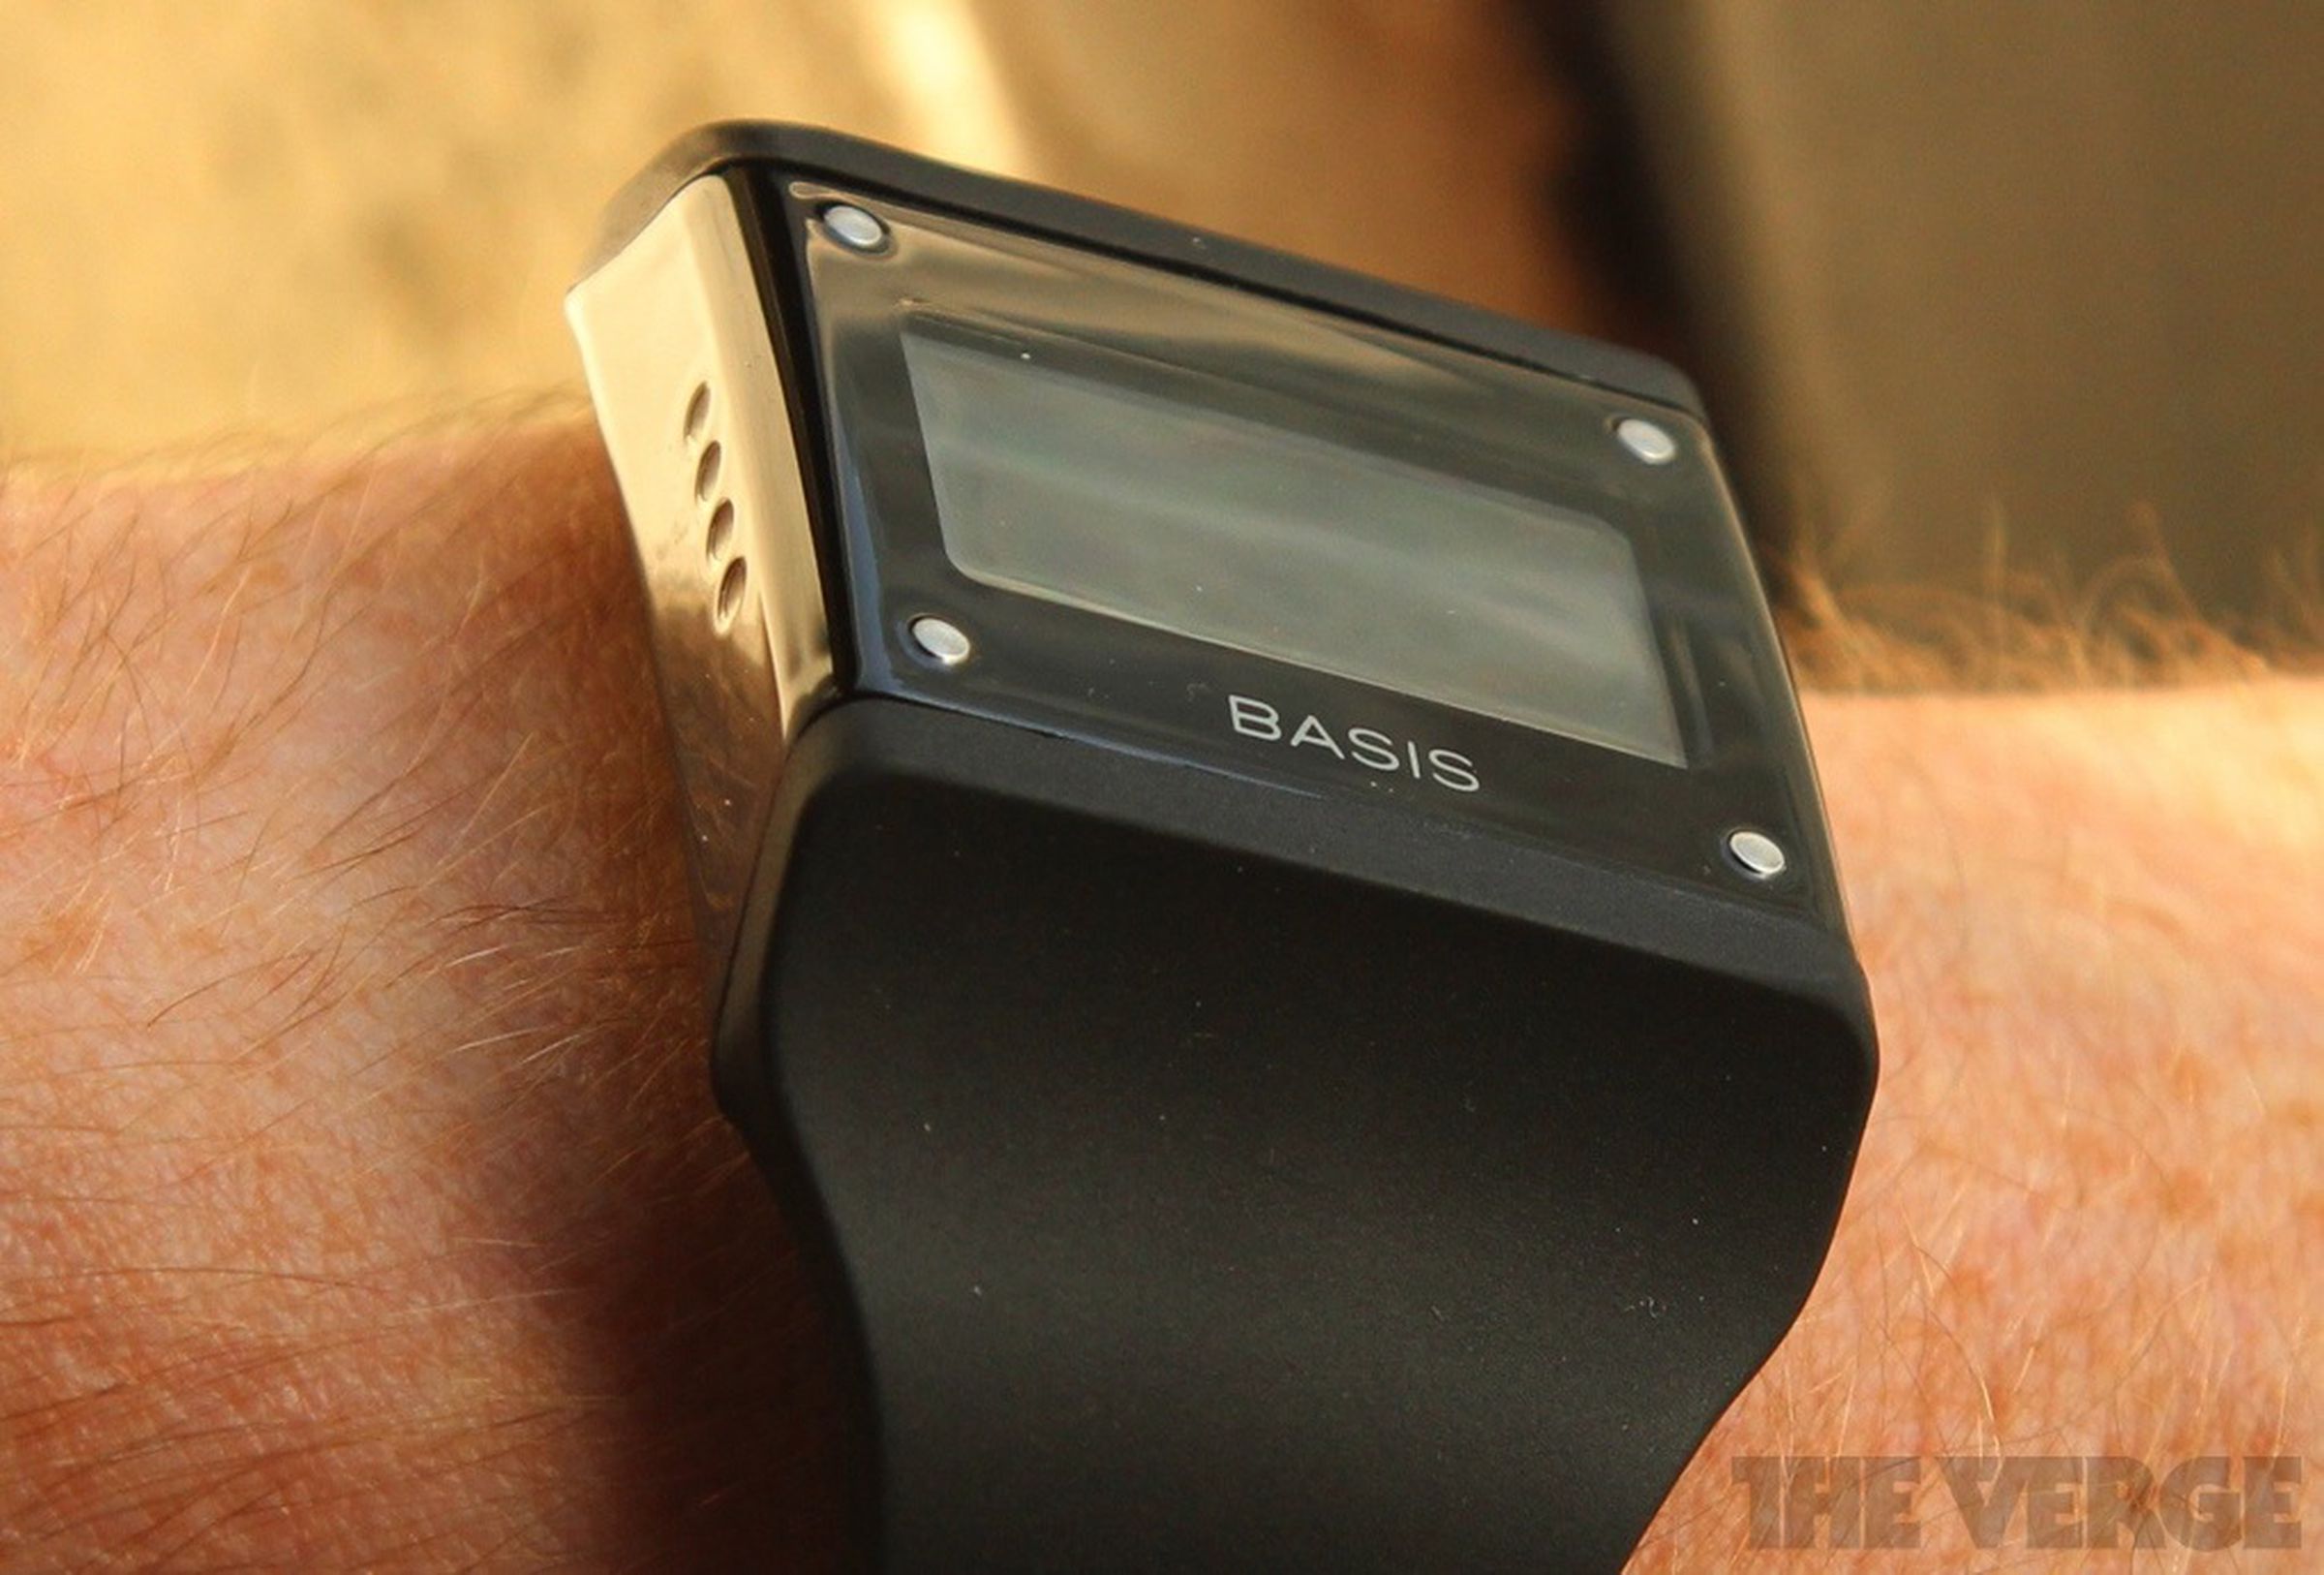 Basis fitness band pictures